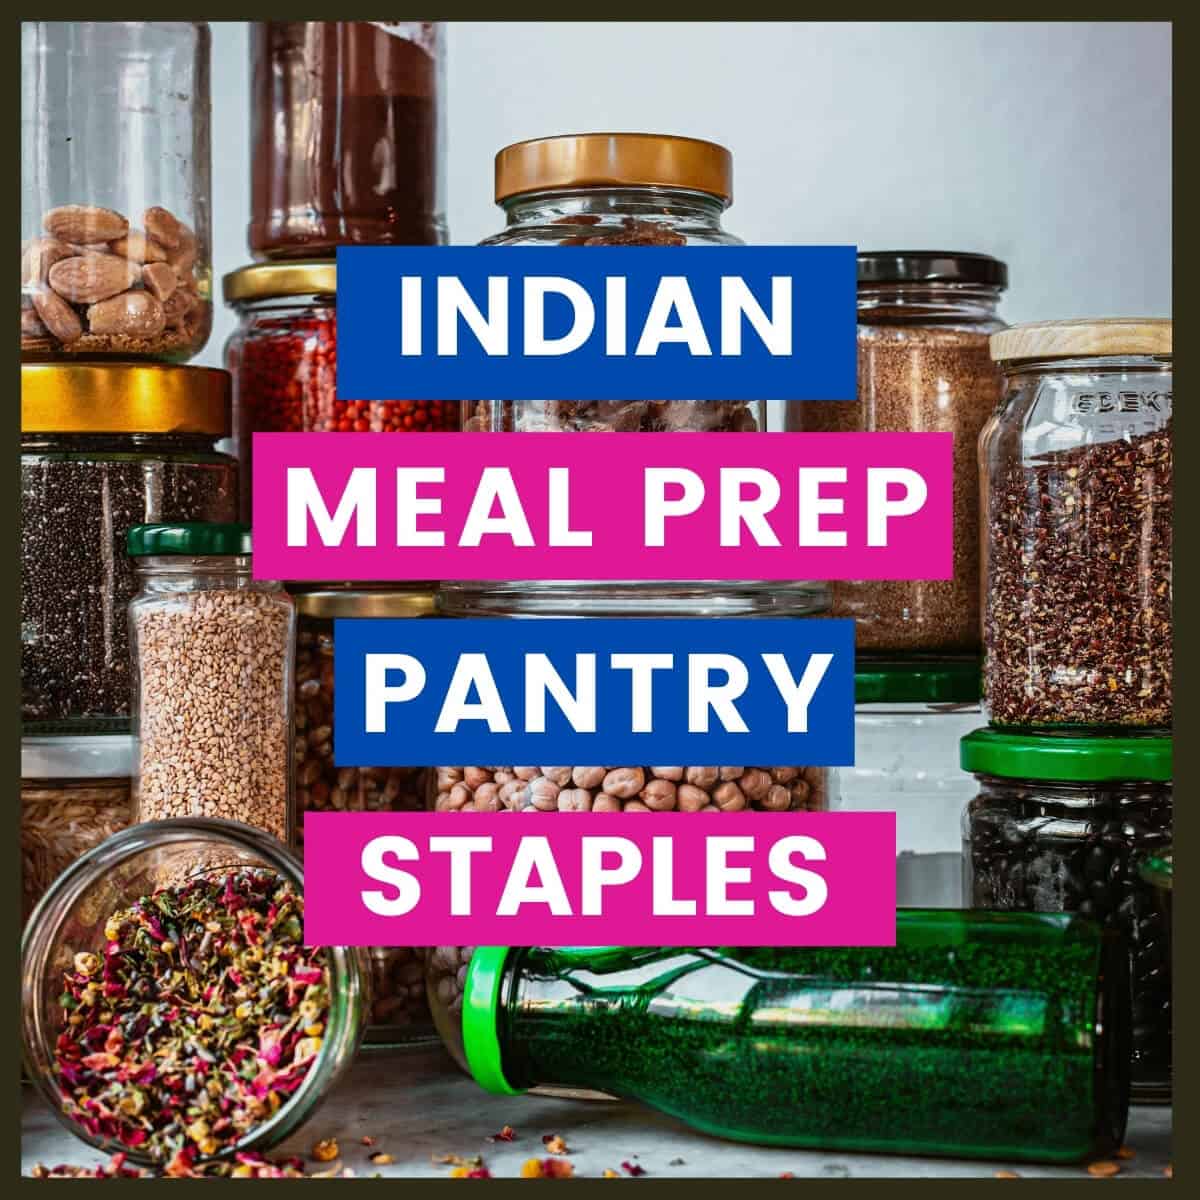 Pantry Staples for Indian Meal Prep